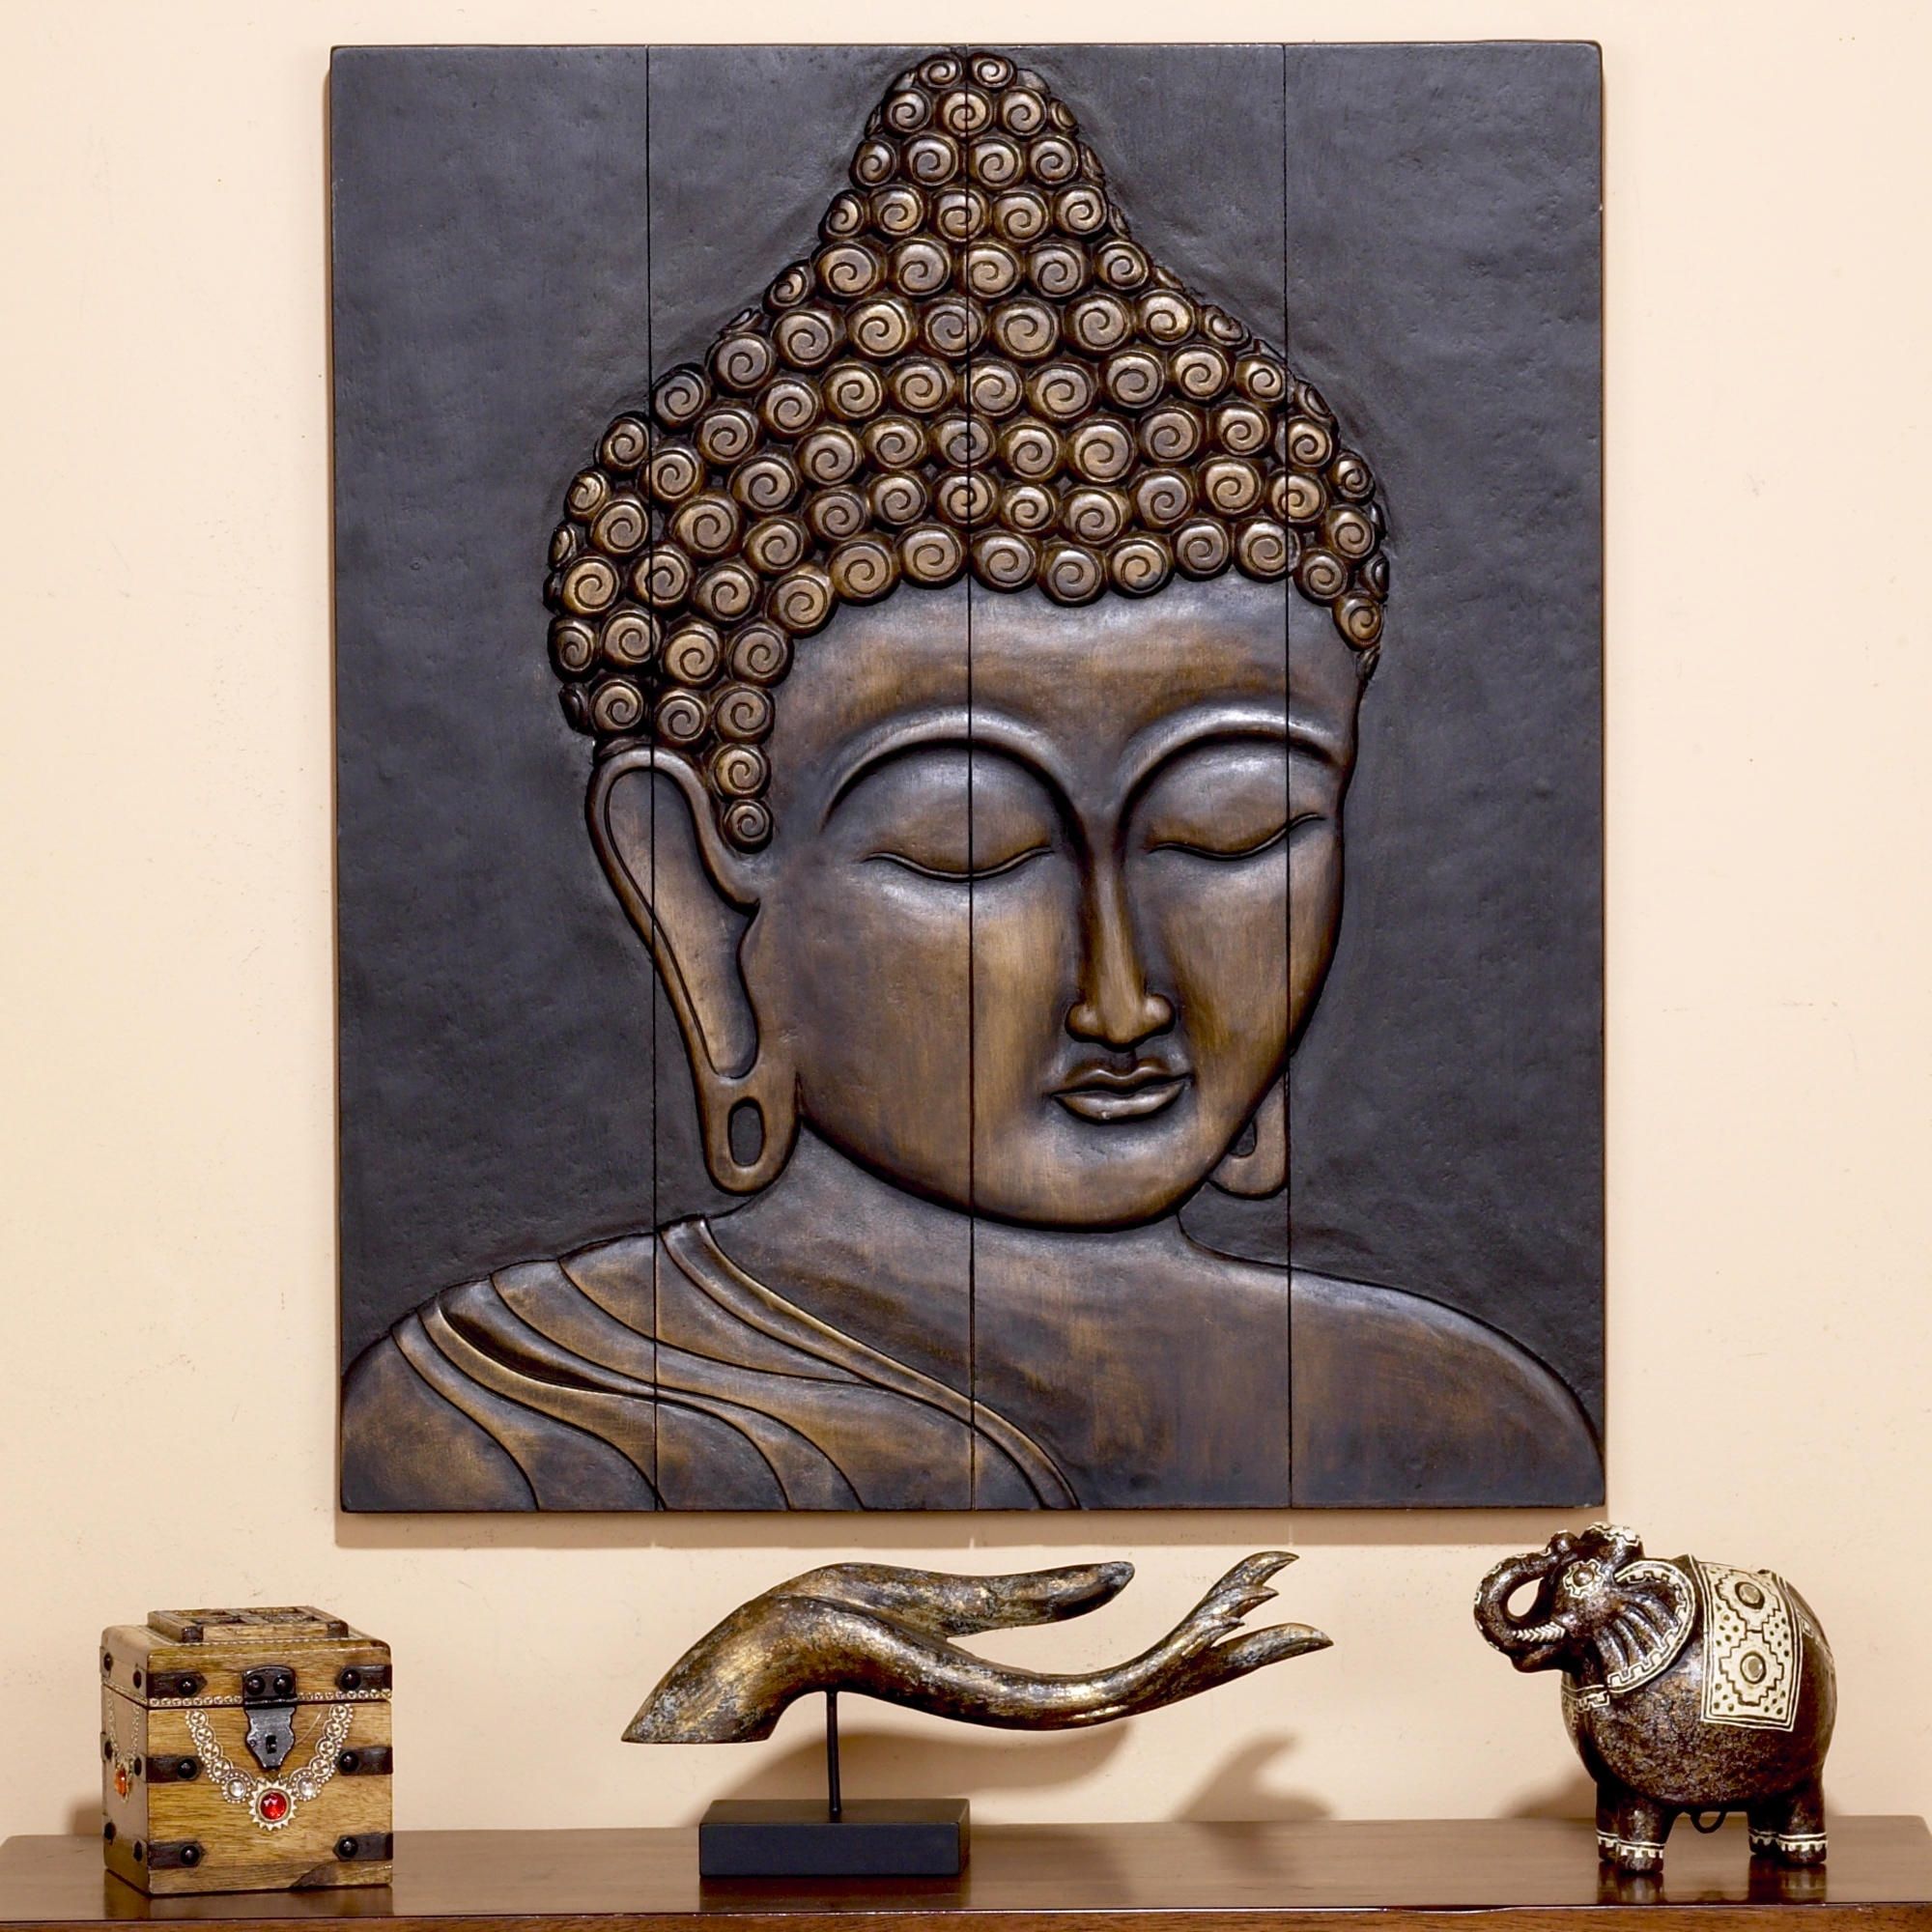 Buddha Wood Wall Art Throughout Recent Art For Wall Space Between Windows Over Couch – Love This Buddha (View 9 of 15)